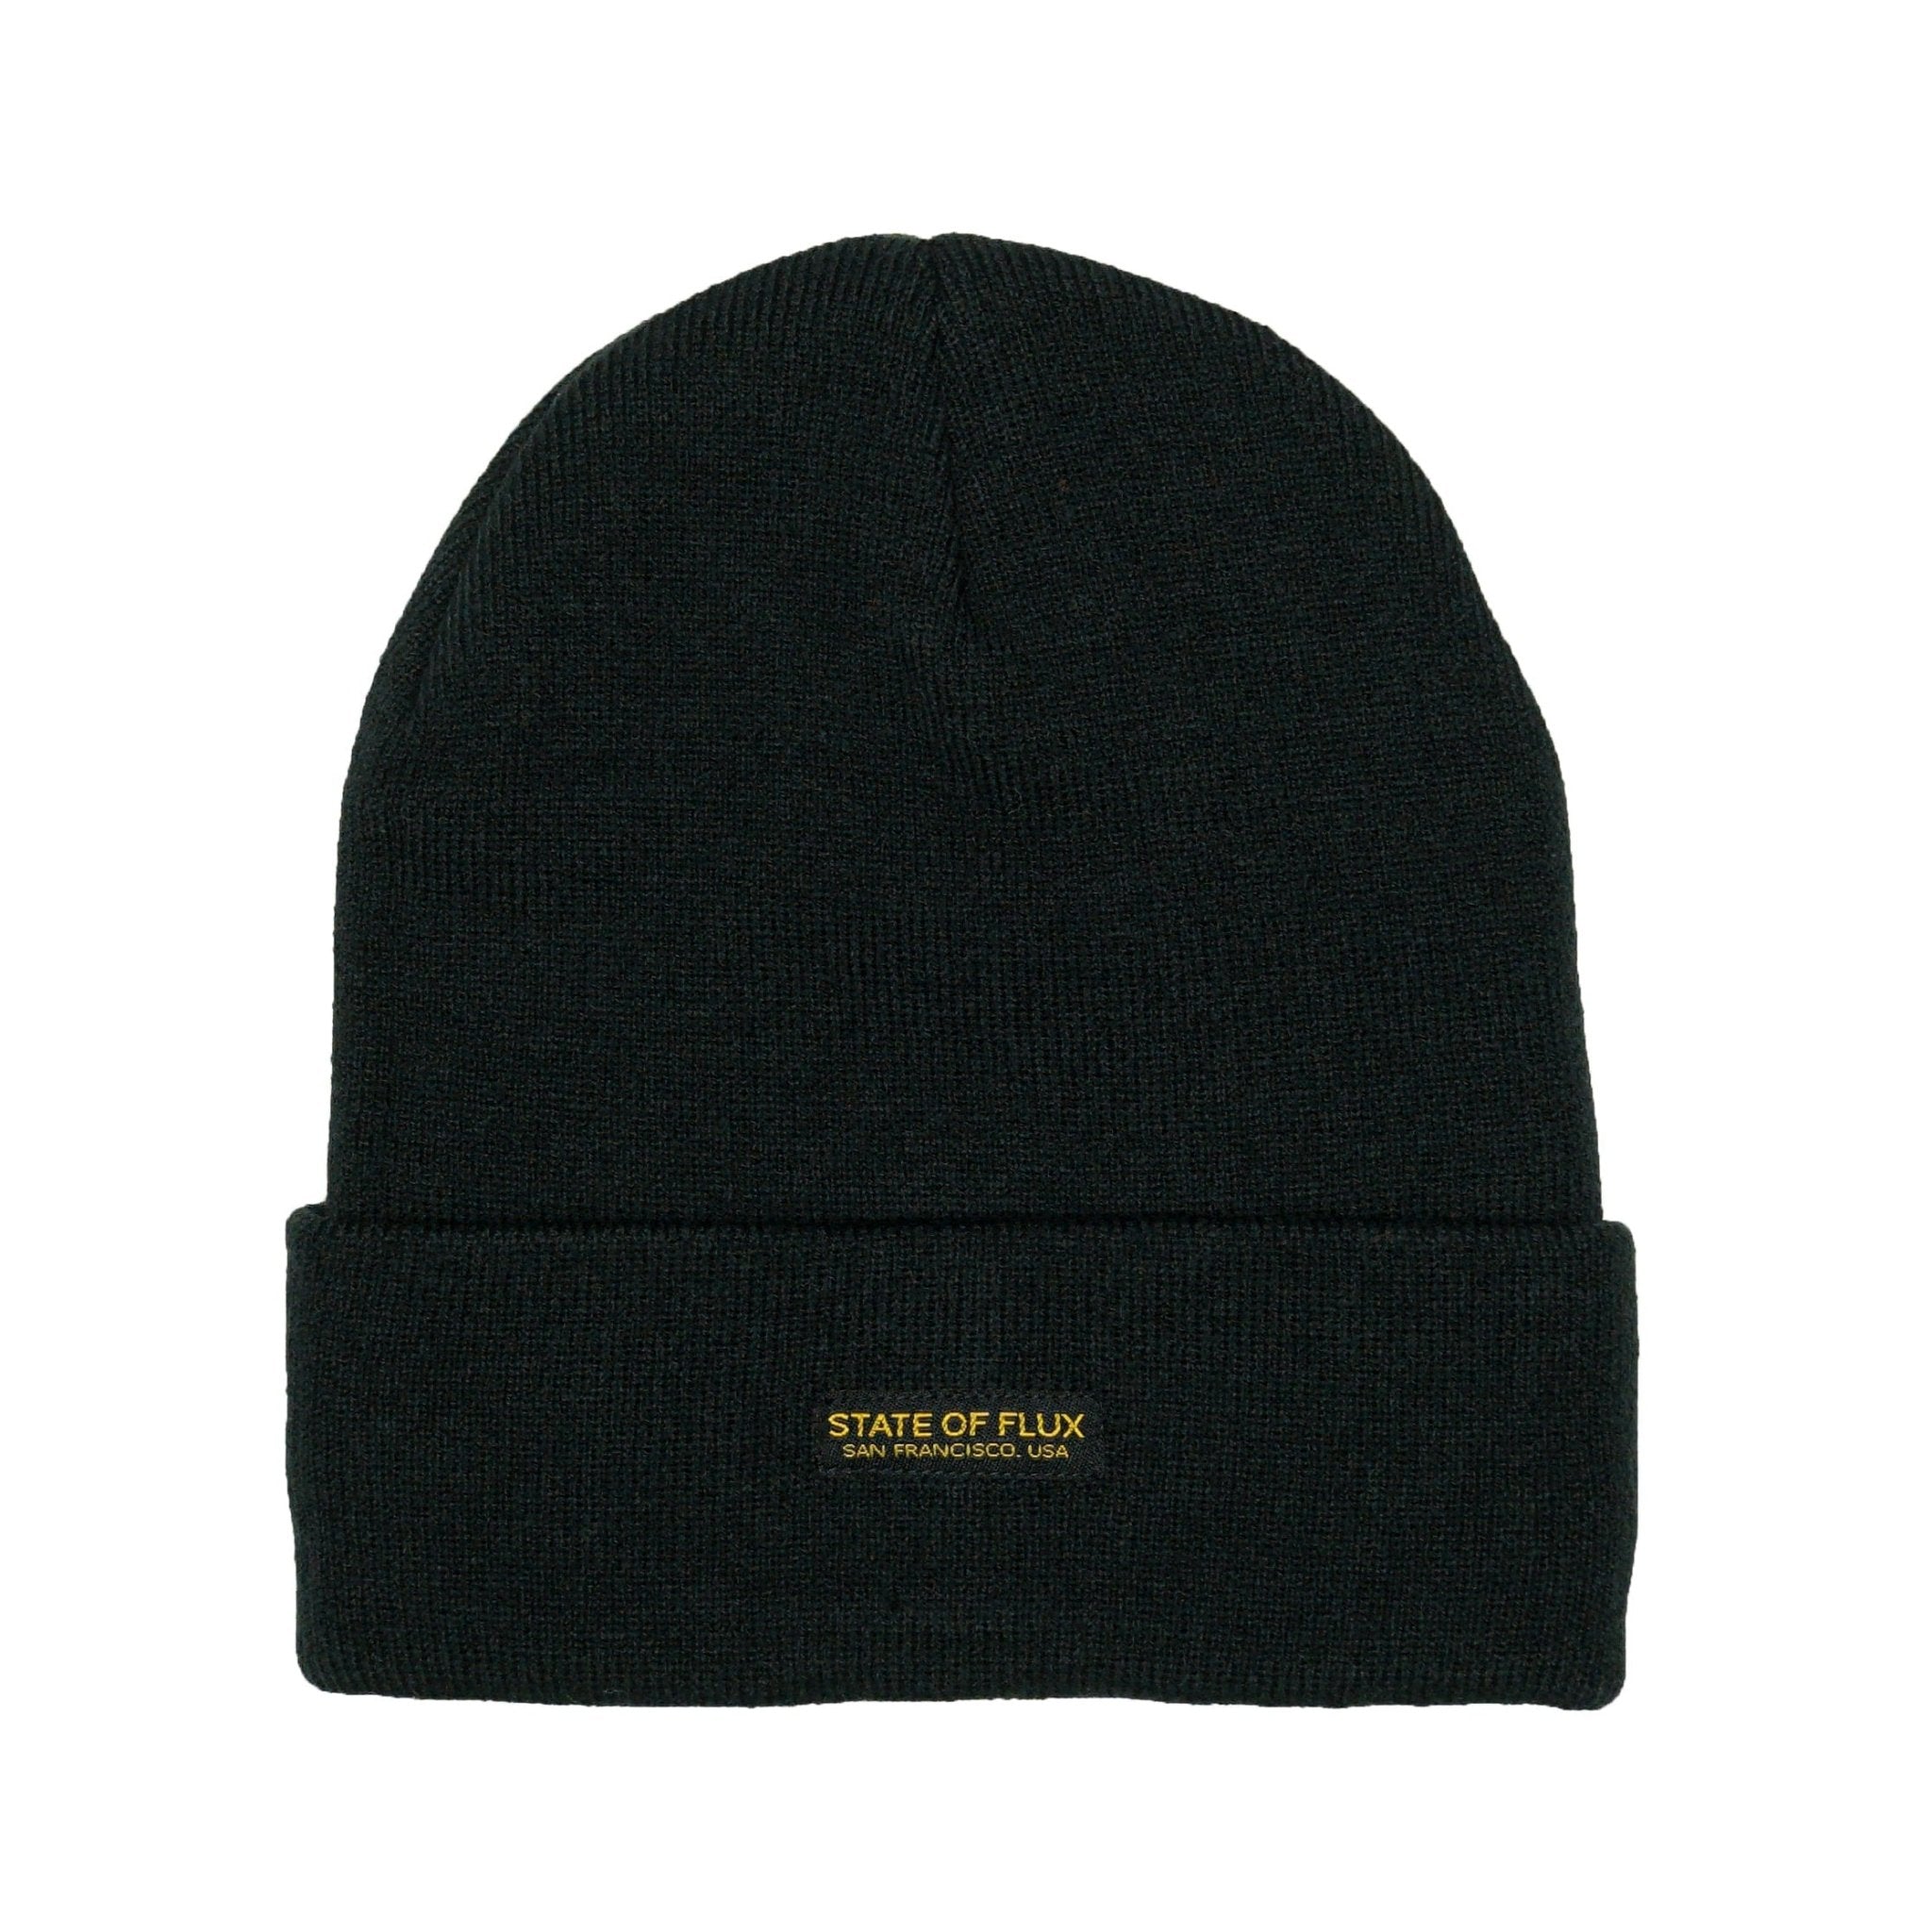 Insulated Mantra Beanie in black